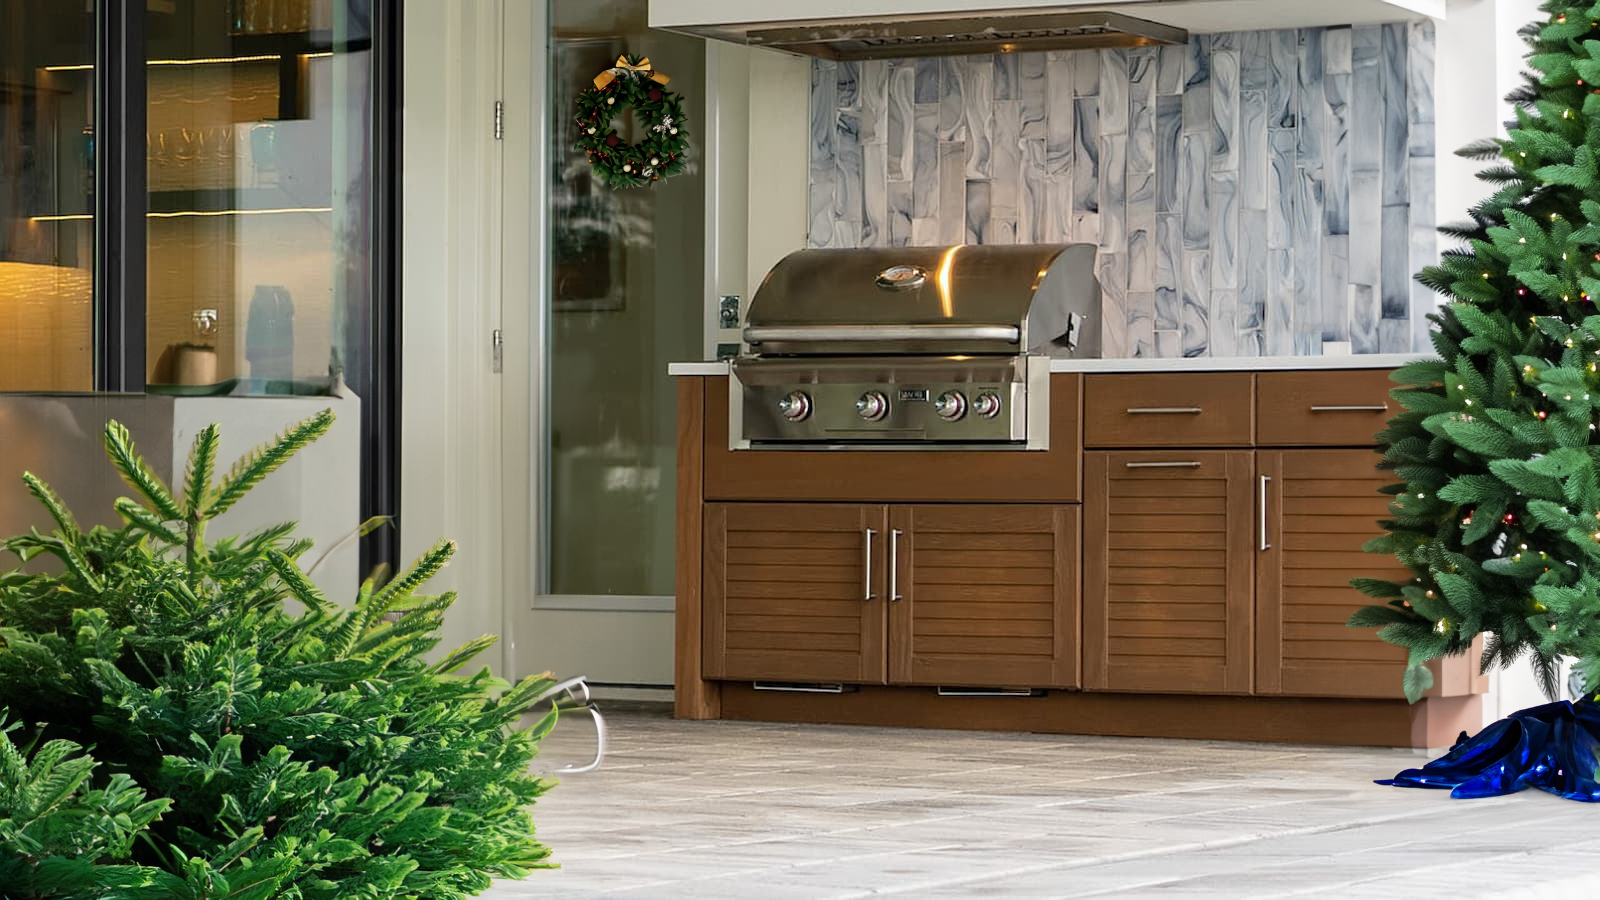 winter Seasonal Decor for Outdoor Cabinetry: Enhancing Your Outdoor Space